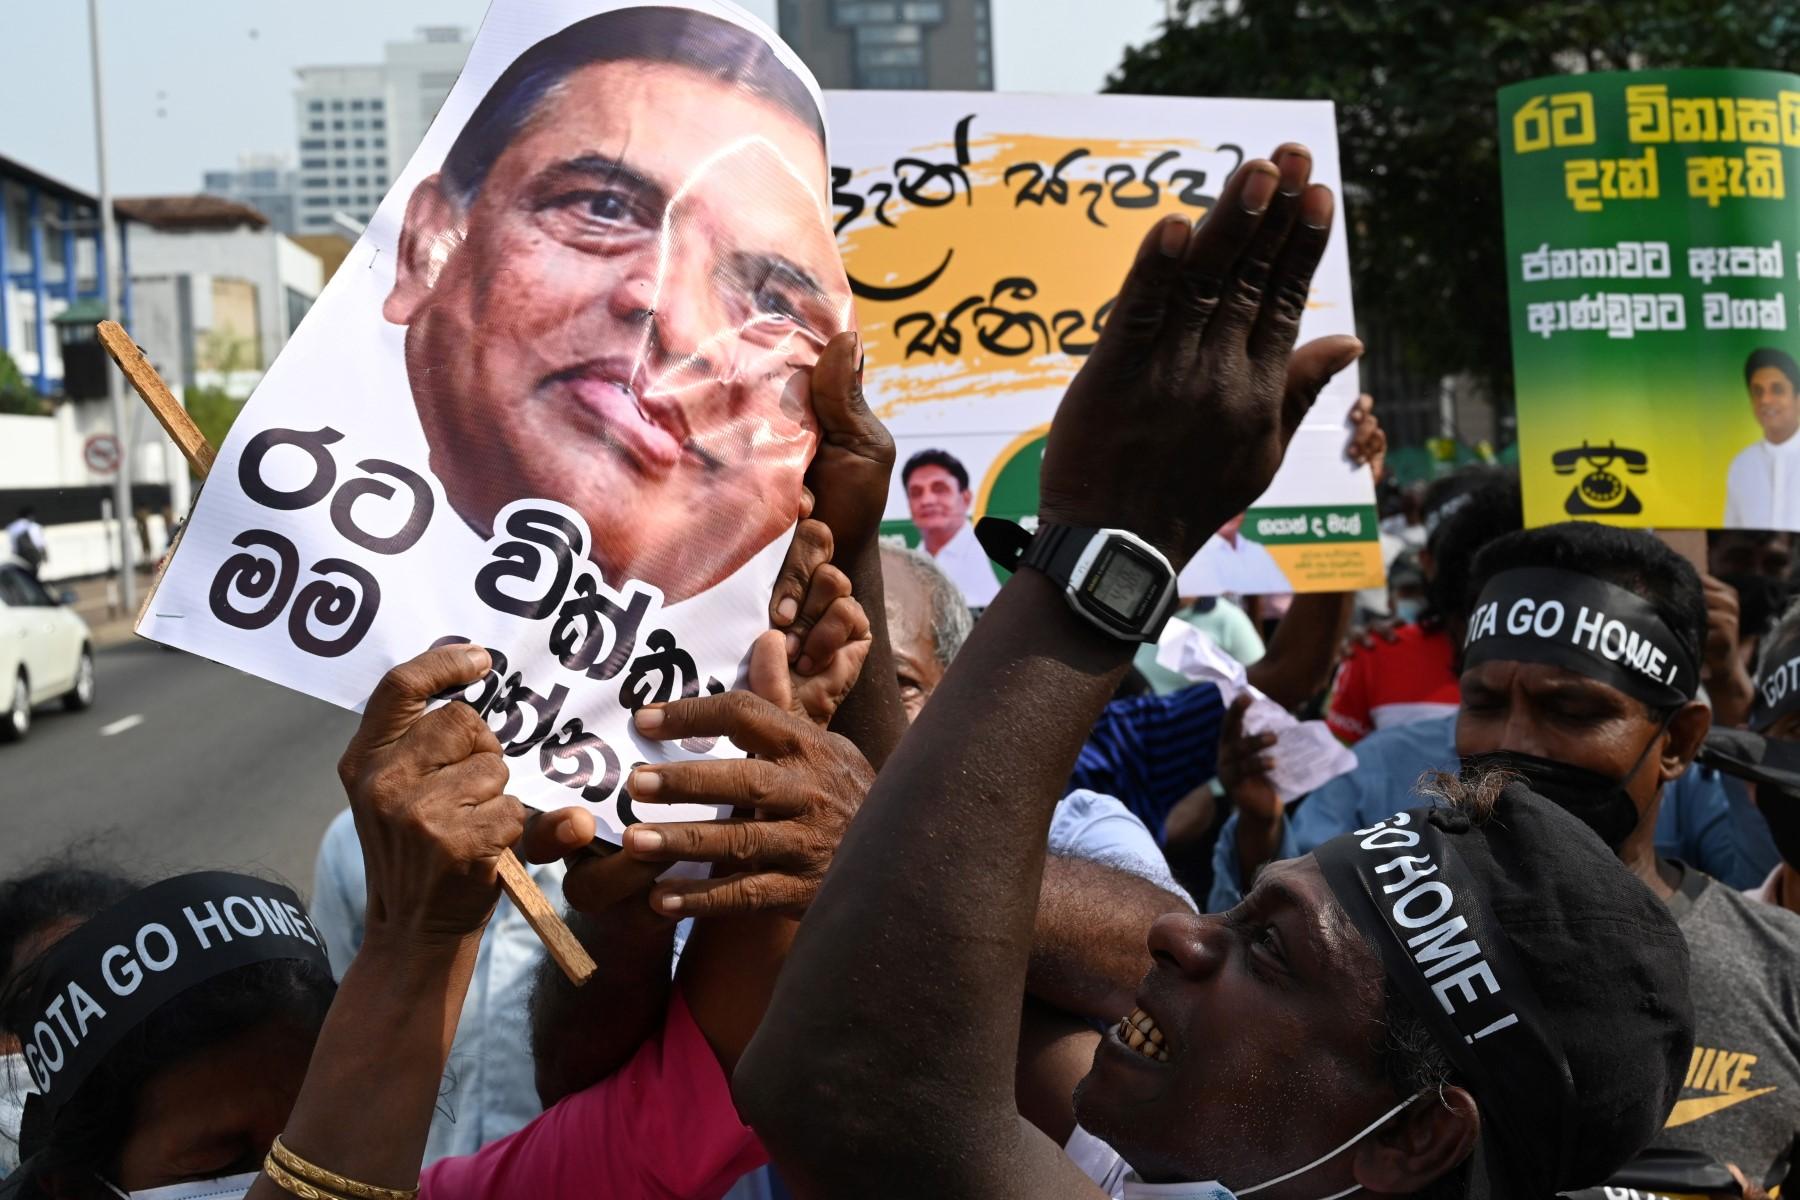 An opposition activist holds a placard depicting former Sri Lanka finance minister Basil Rajapaksa during a protest against rising living costs, at the entrance of the president's office in Colombo on March 15. Photo: AFP